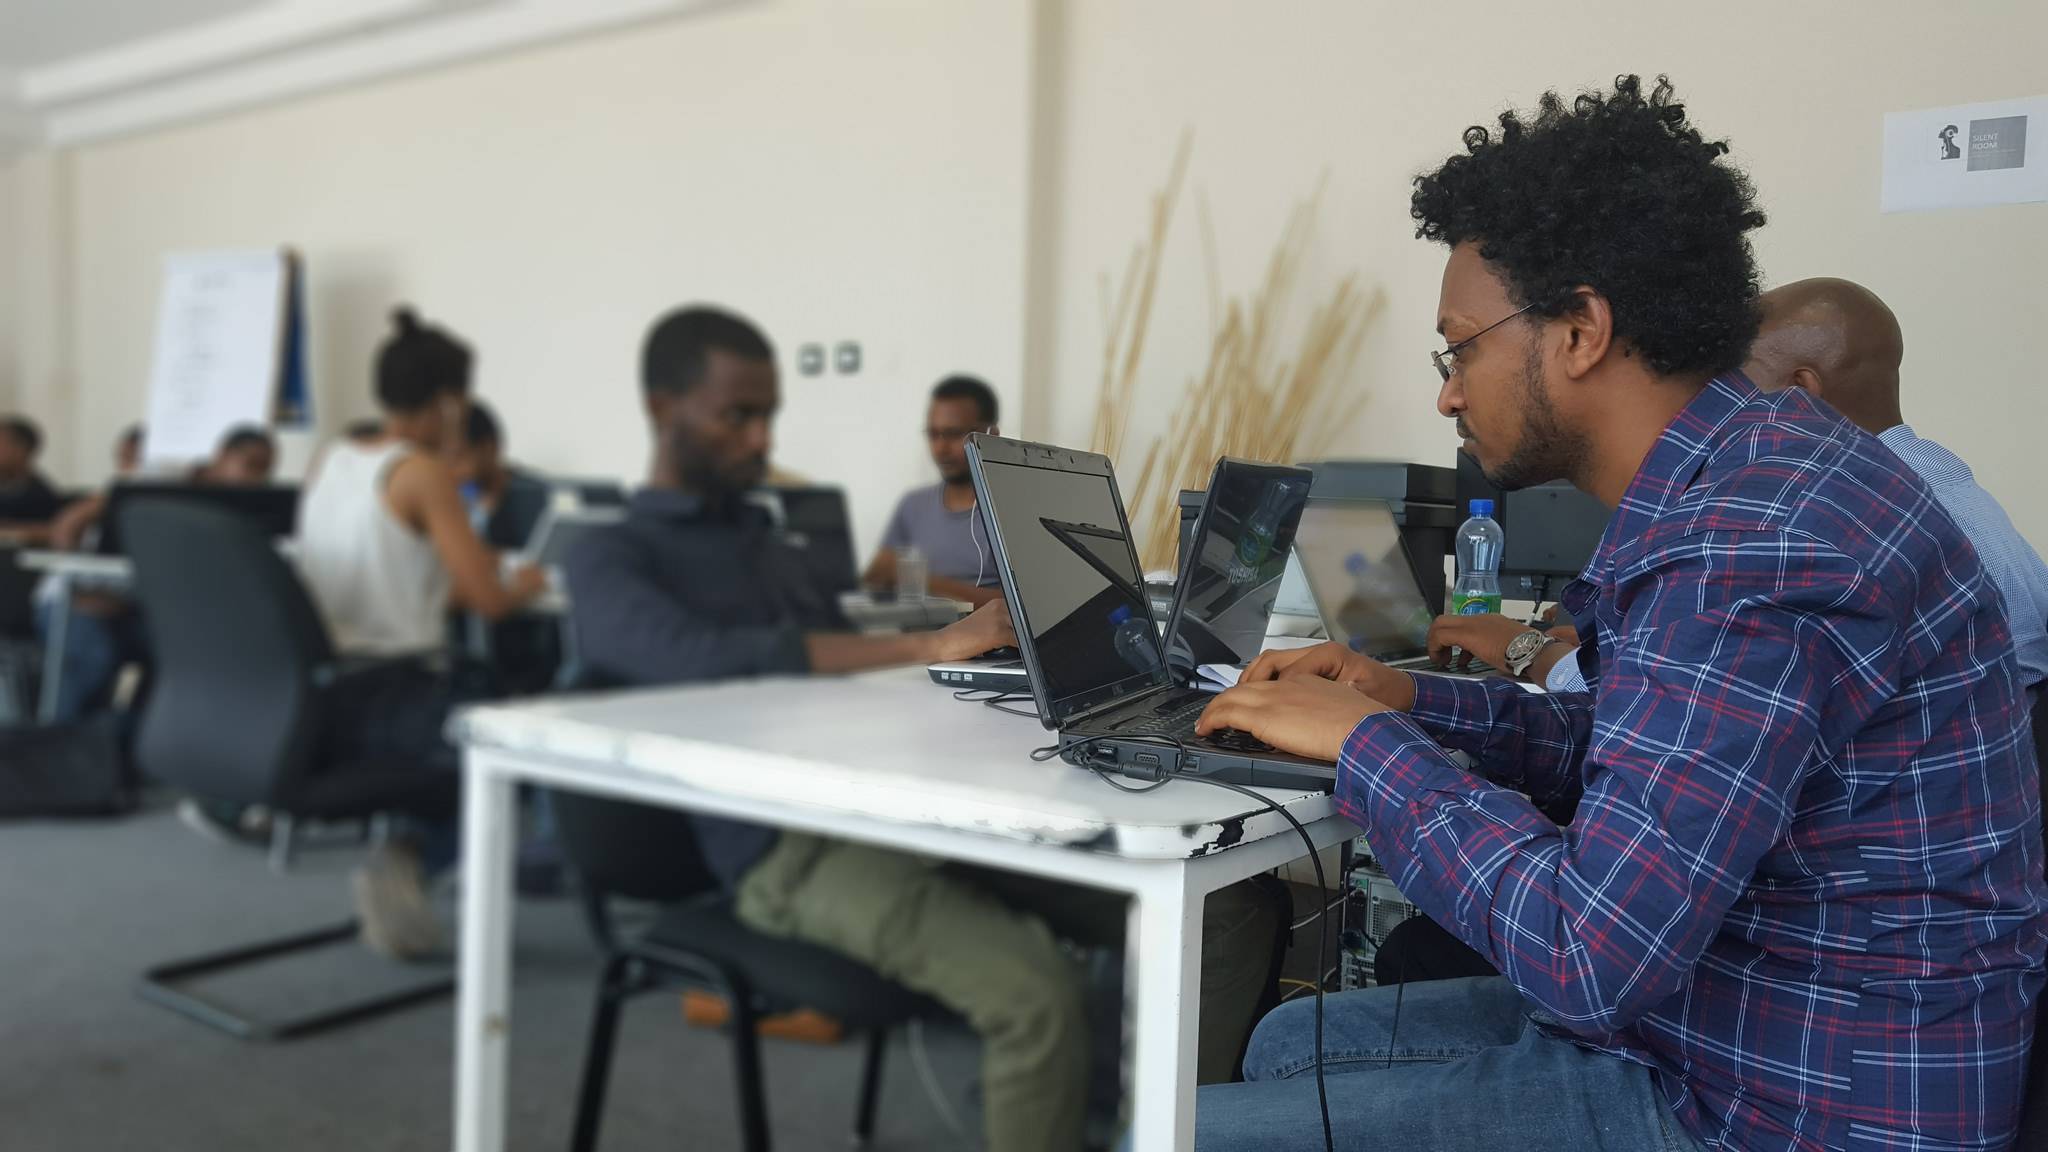 Berlin non-profit trains refugees as coders